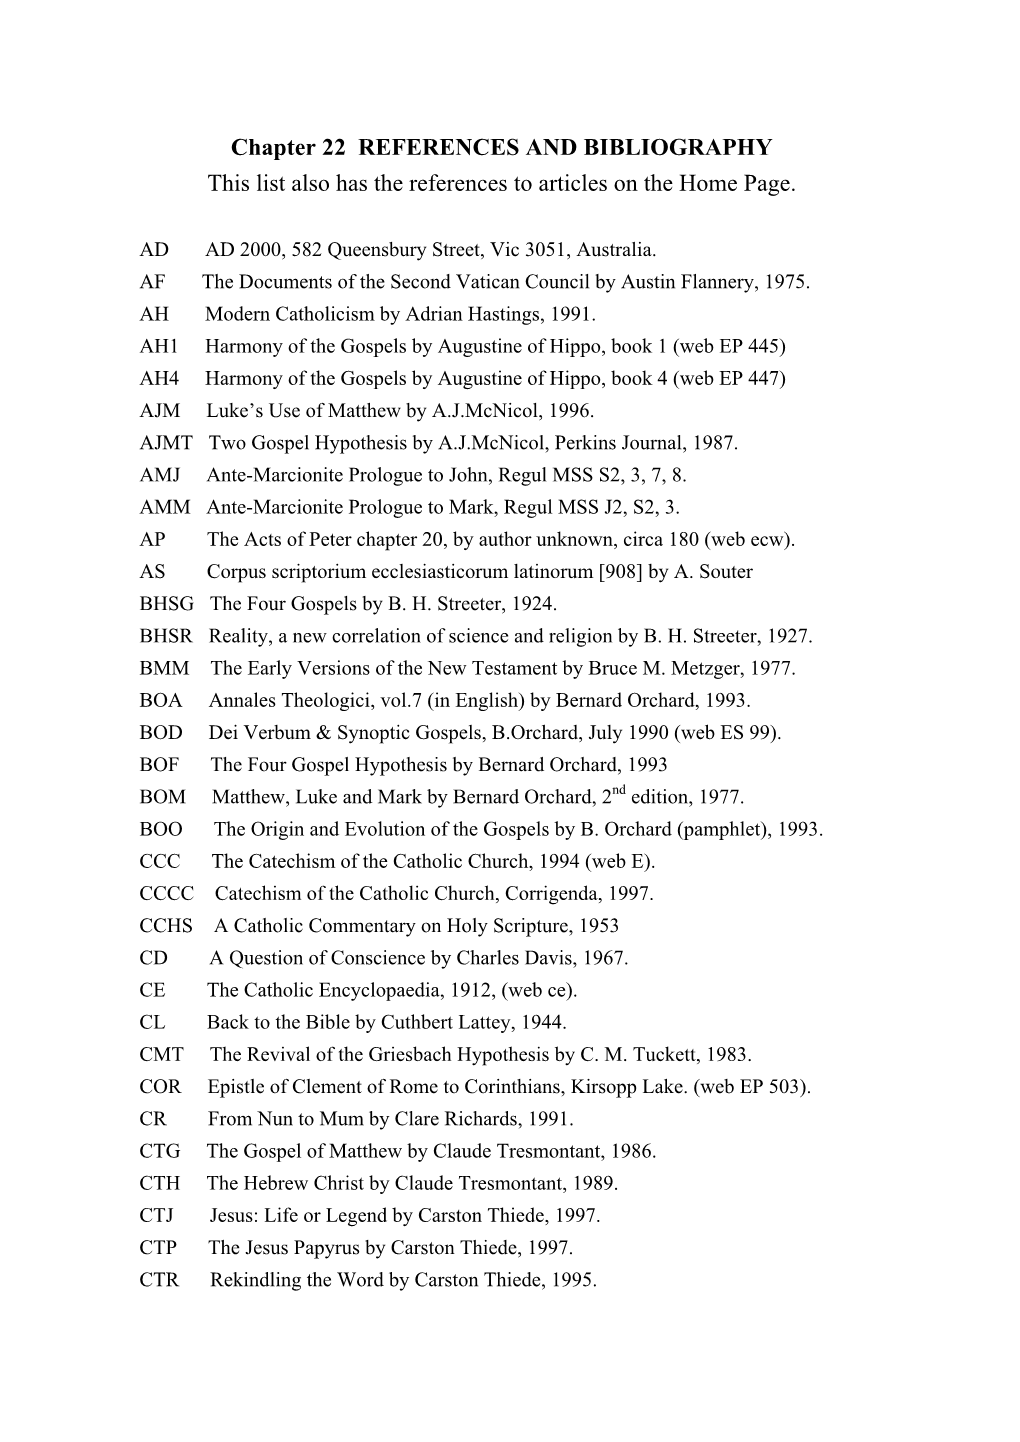 Chapter 22 REFERENCES and BIBLIOGRAPHY This List Also Has the References to Articles on the Home Page